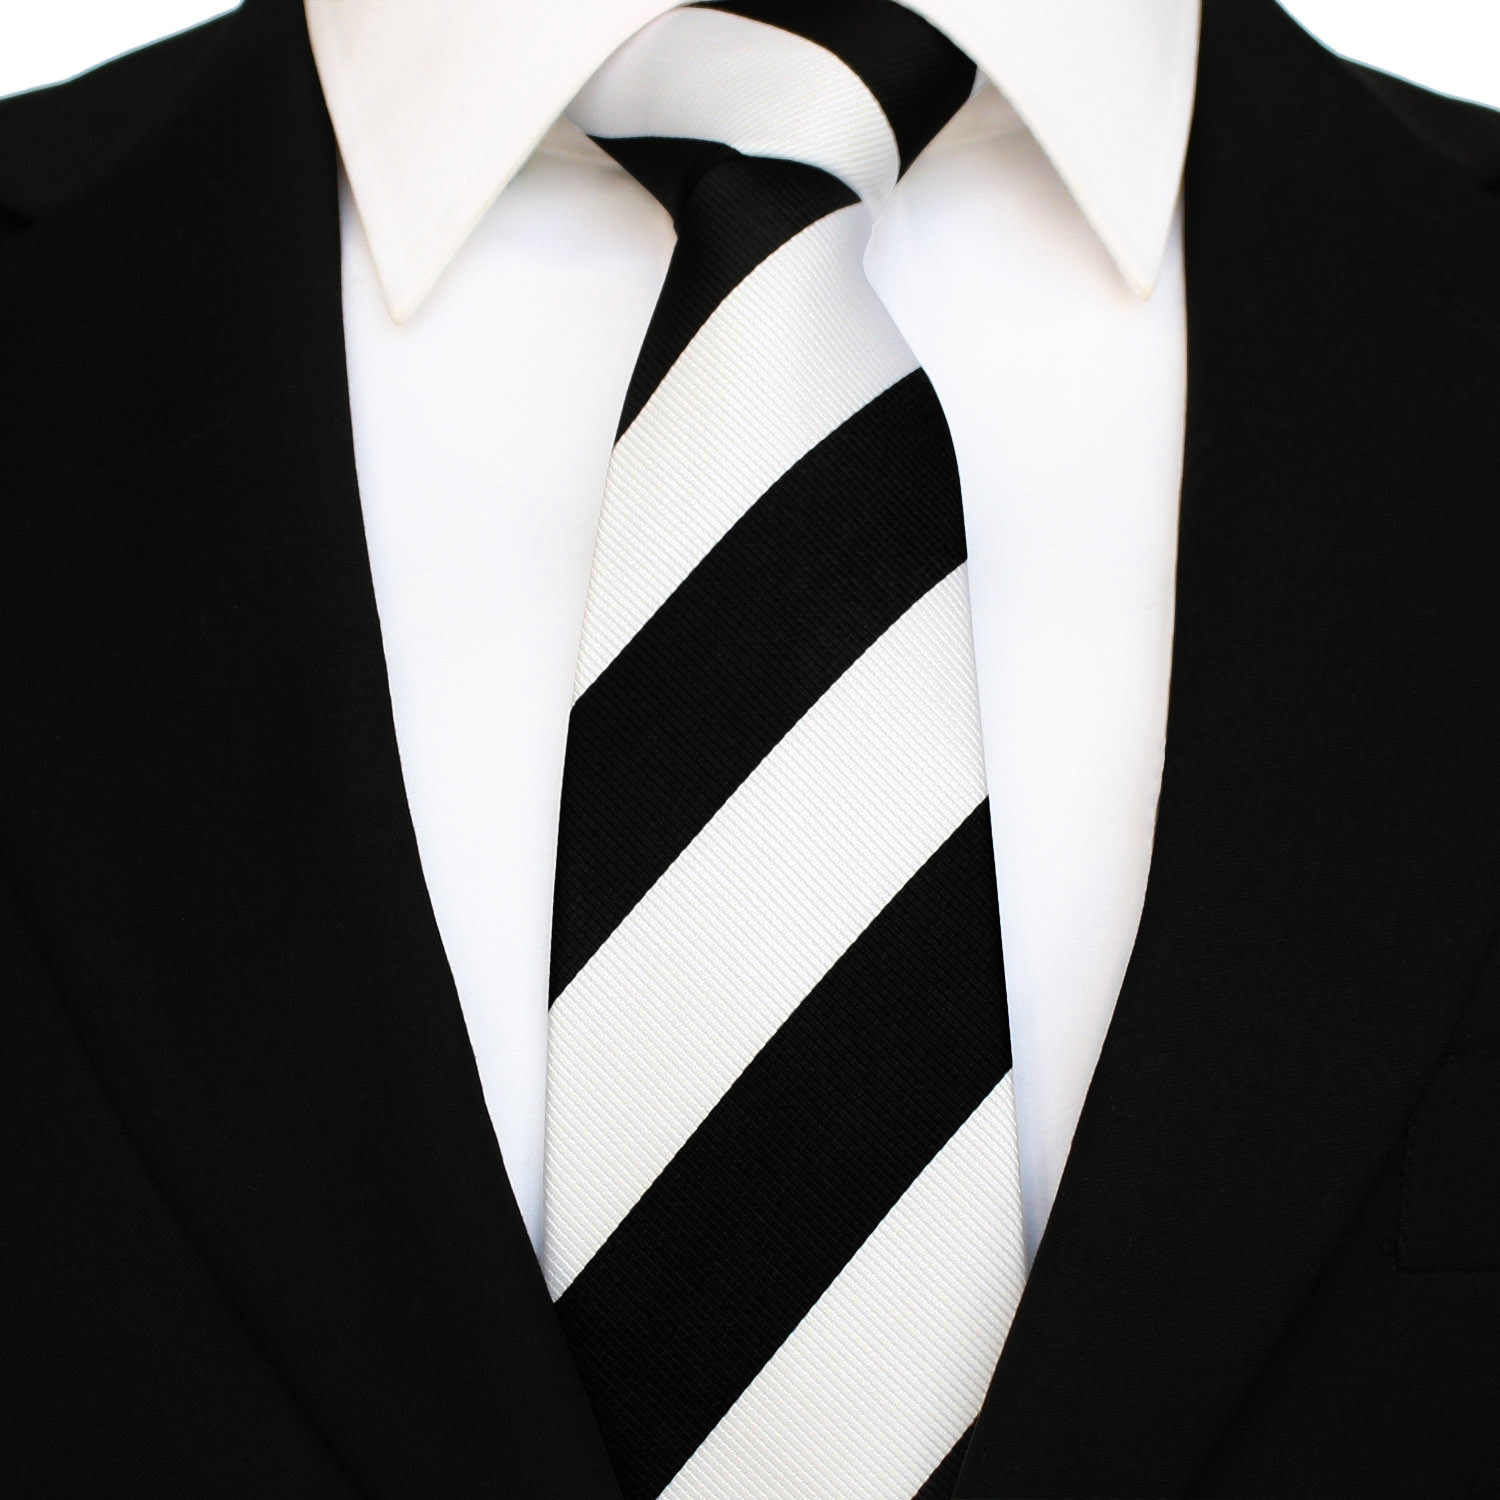 man in suit and tie clipart